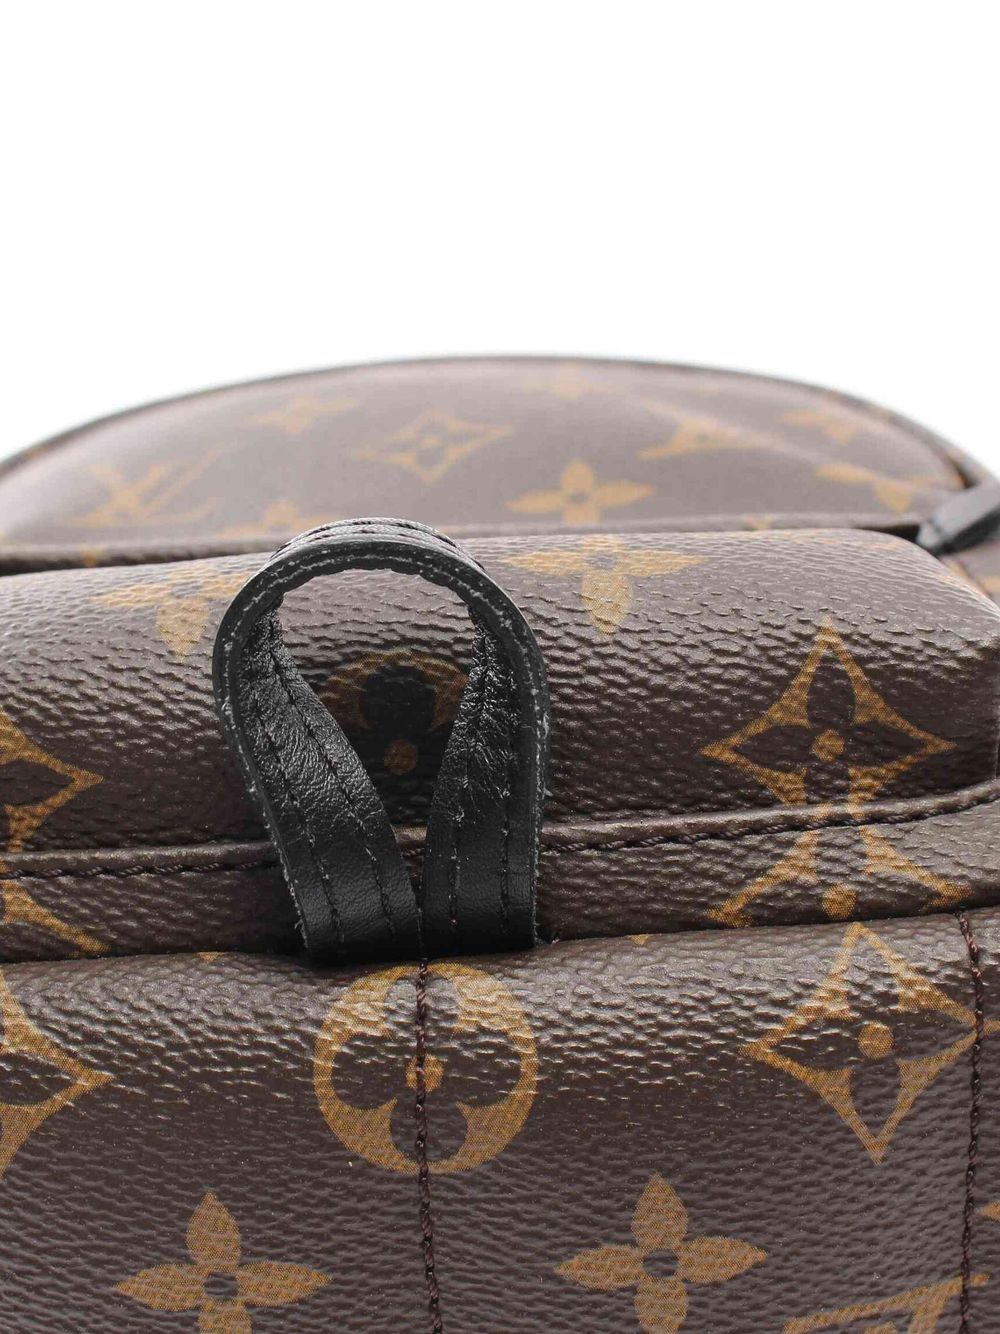 Louis Vuitton pre-owned Mini Palm Springs Backpack - Farfetch